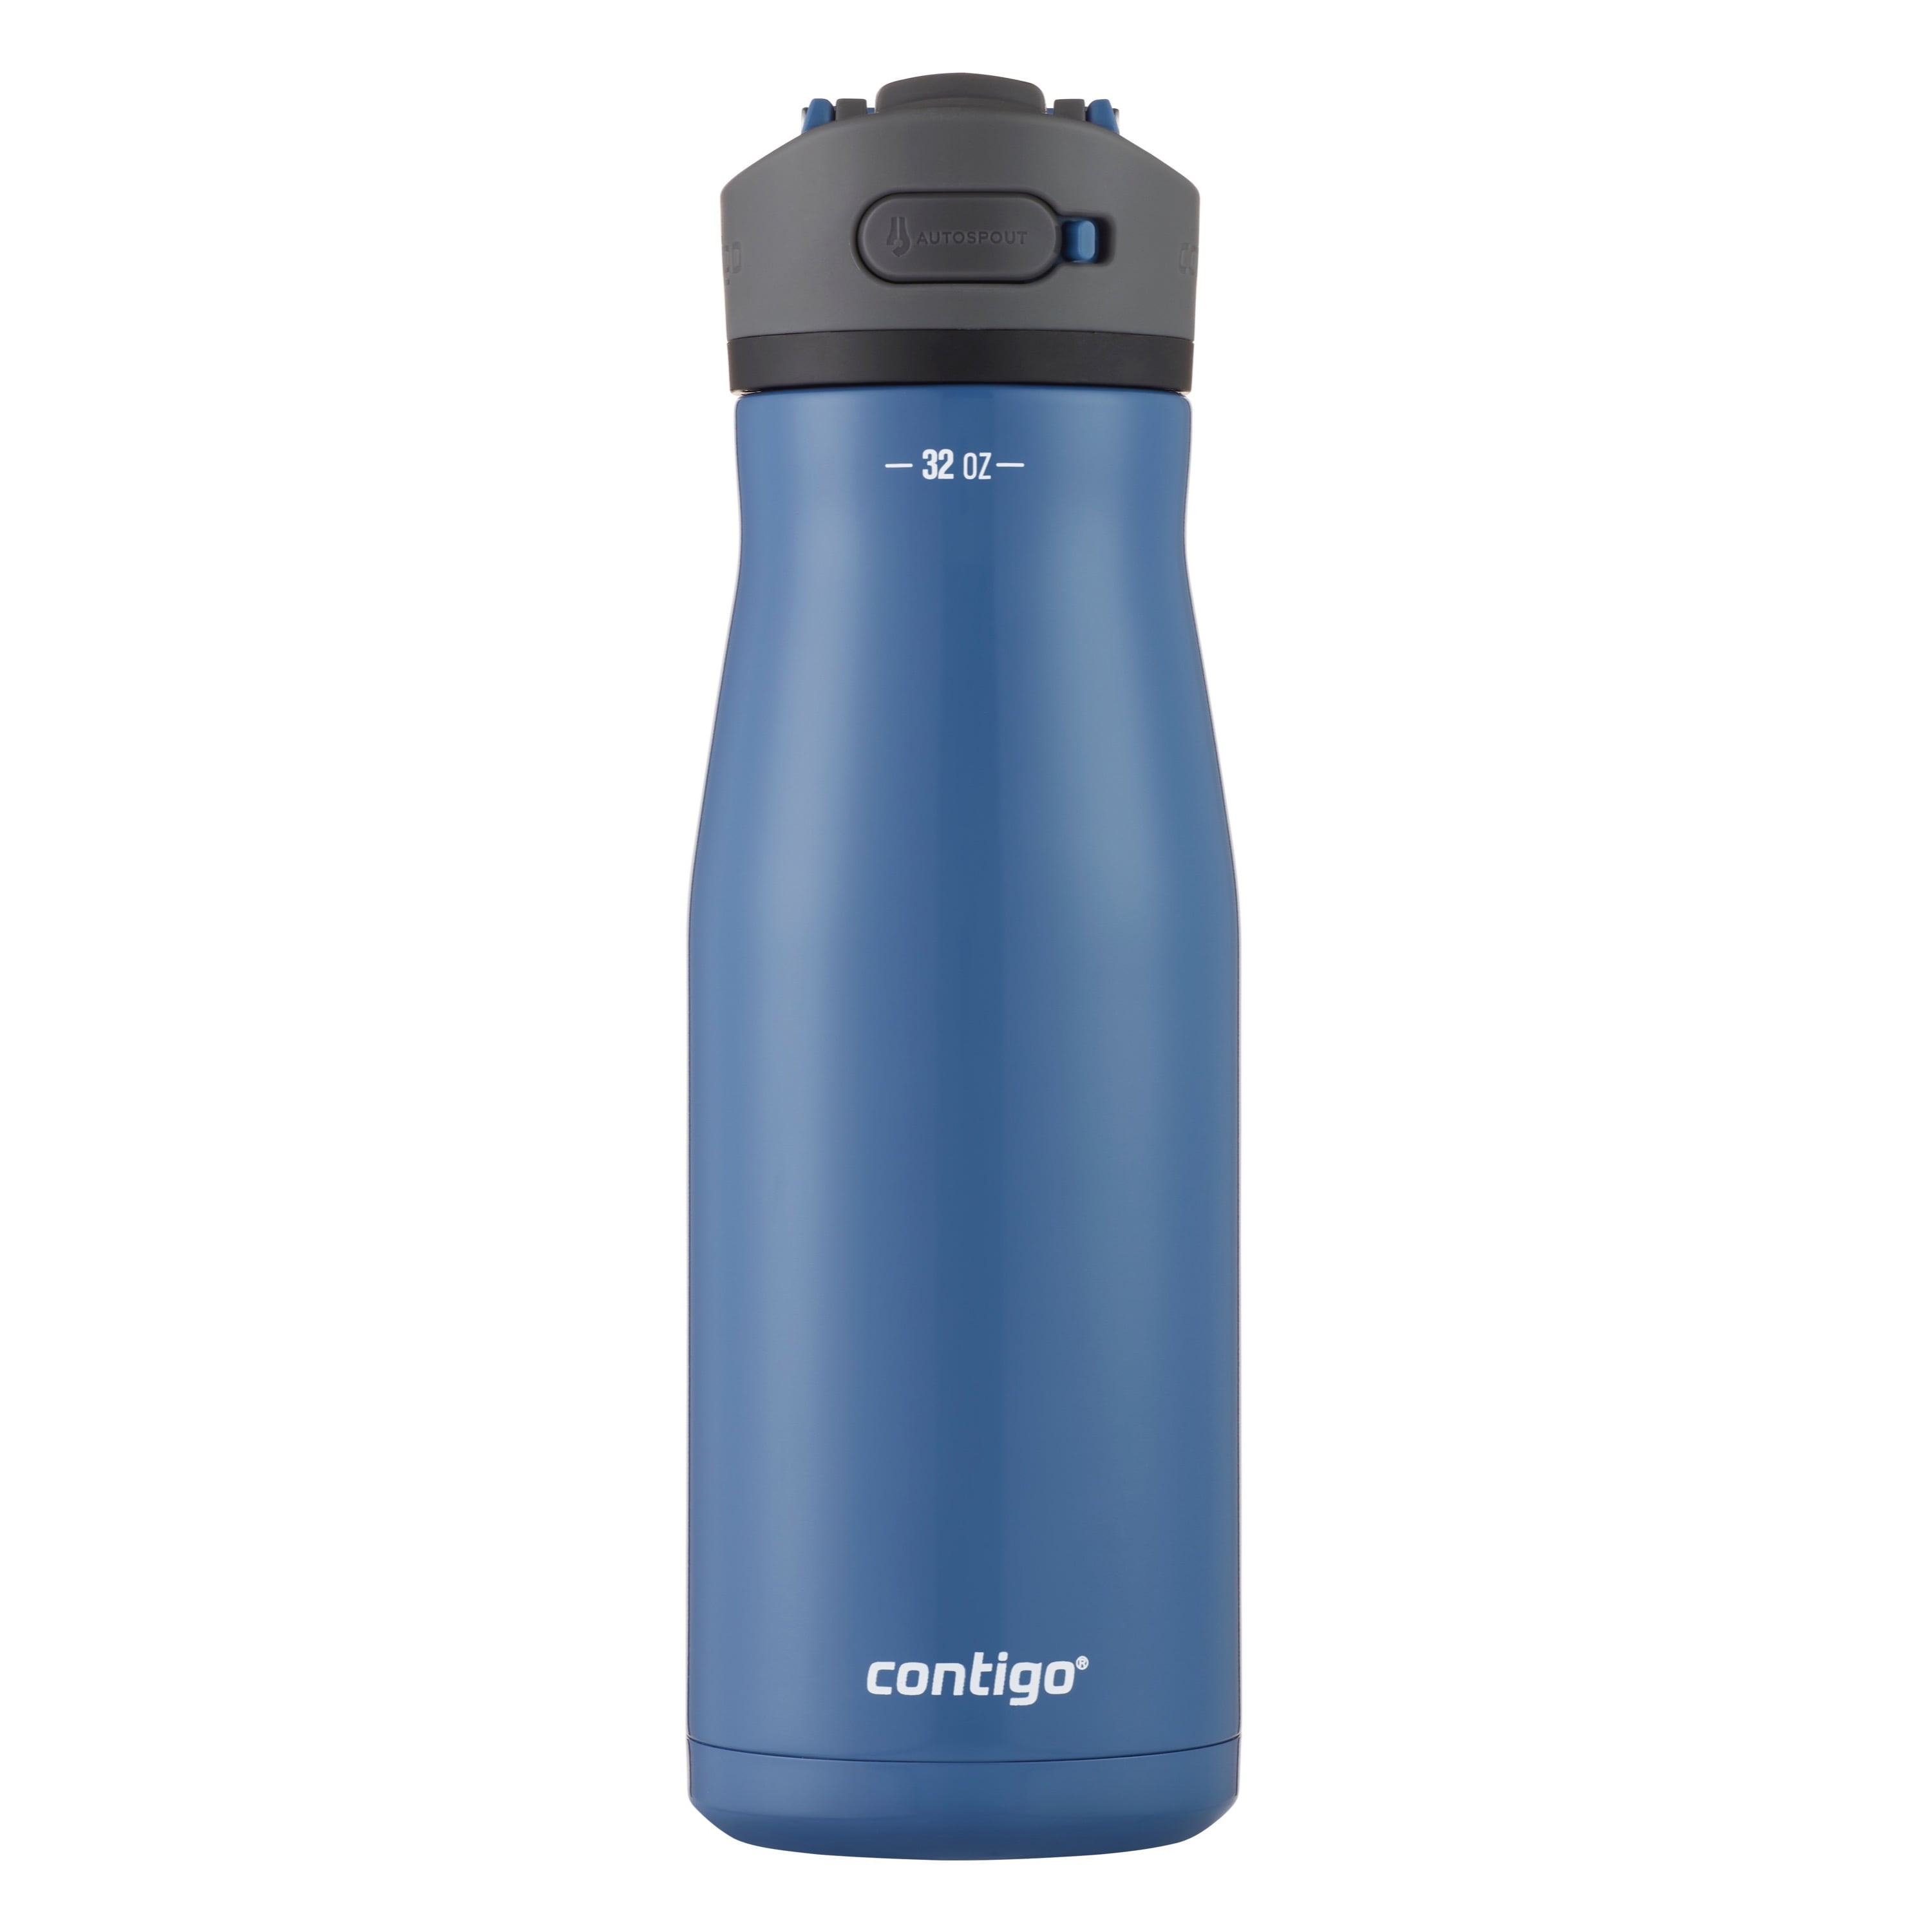 Kälvin Insulated Water Bottle, Charcoal Grey, 14.2 oz (420ml) - Shake to  Activate Hand Warmer & Ice Pack, BPA Free, Hot Water Bottle